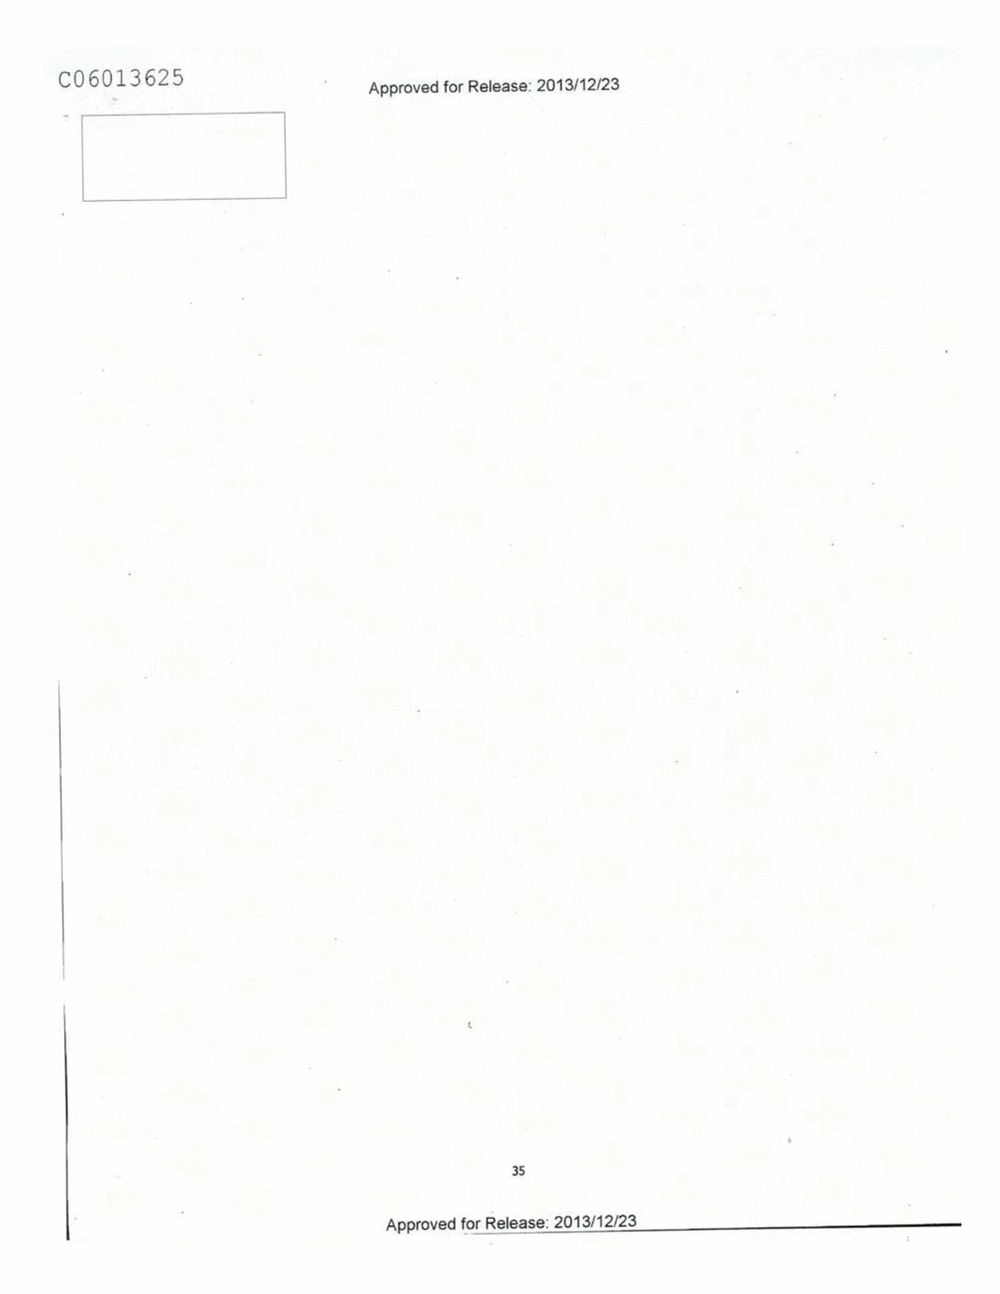 Page 463 from Email Correspondence Between Reporters and CIA Flacks